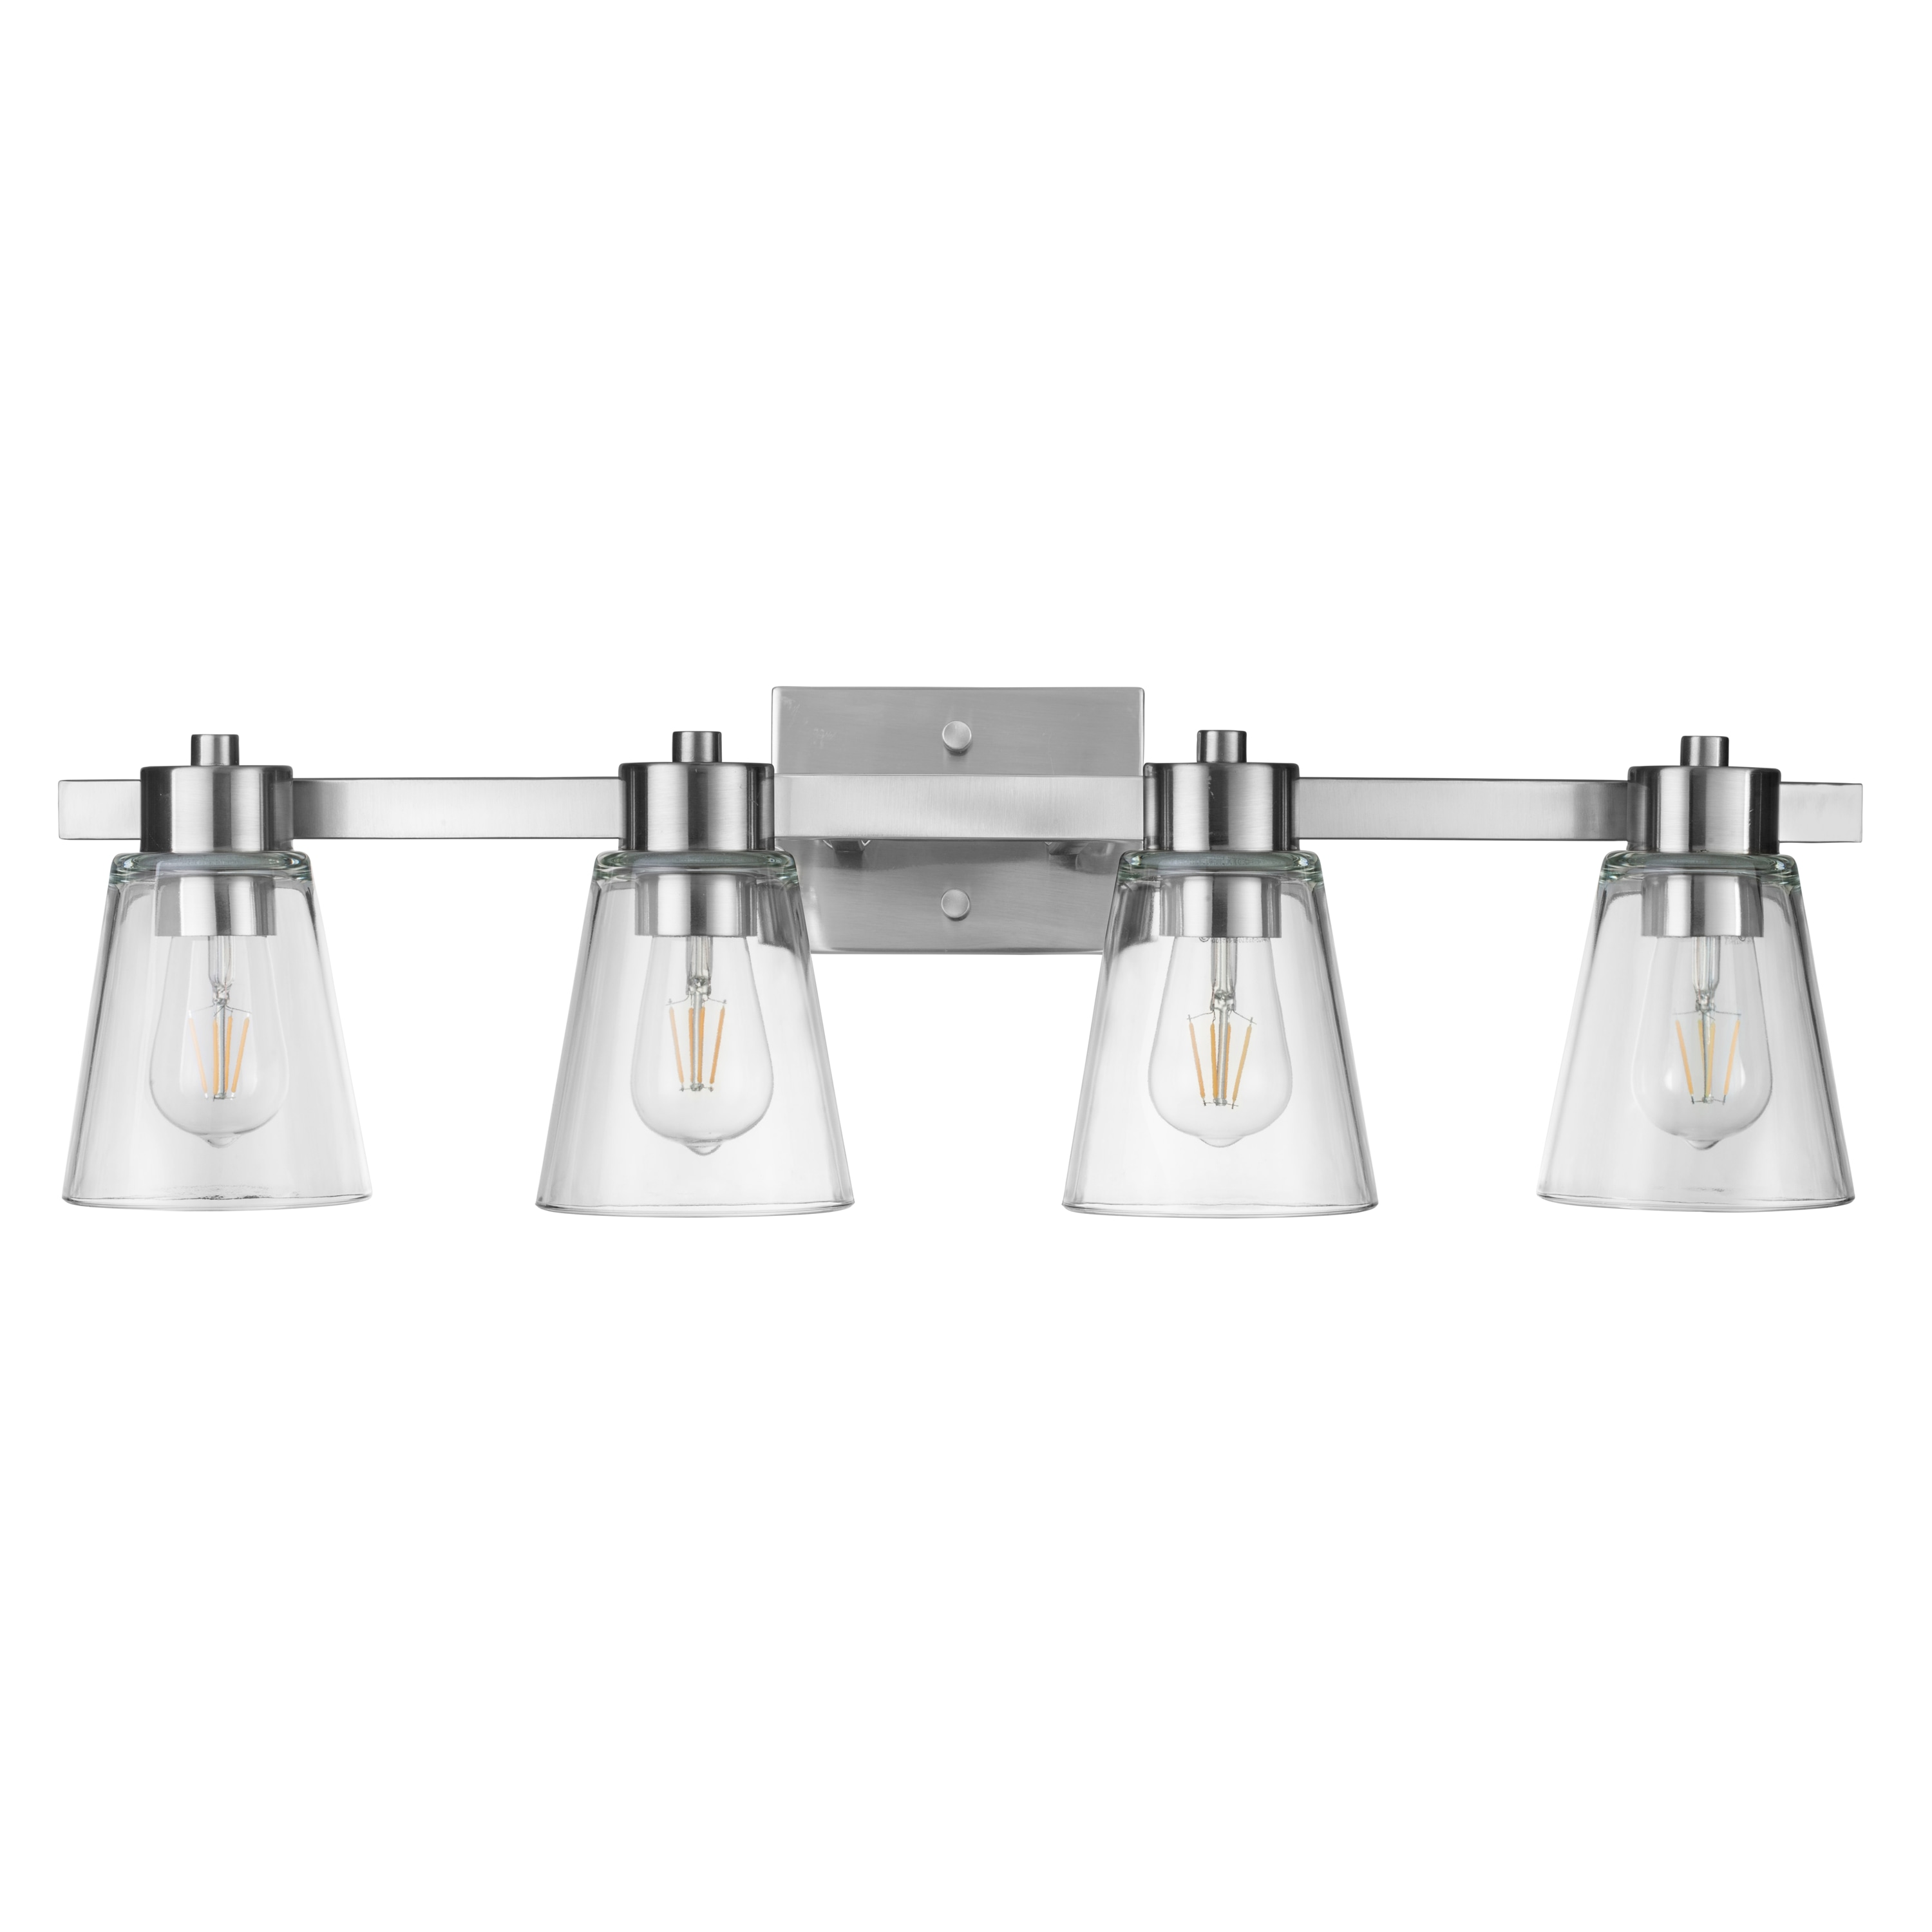 Modern Picture Light LED Wall Sconce Lighting in Satin Nickel  Finish 26 Inch 